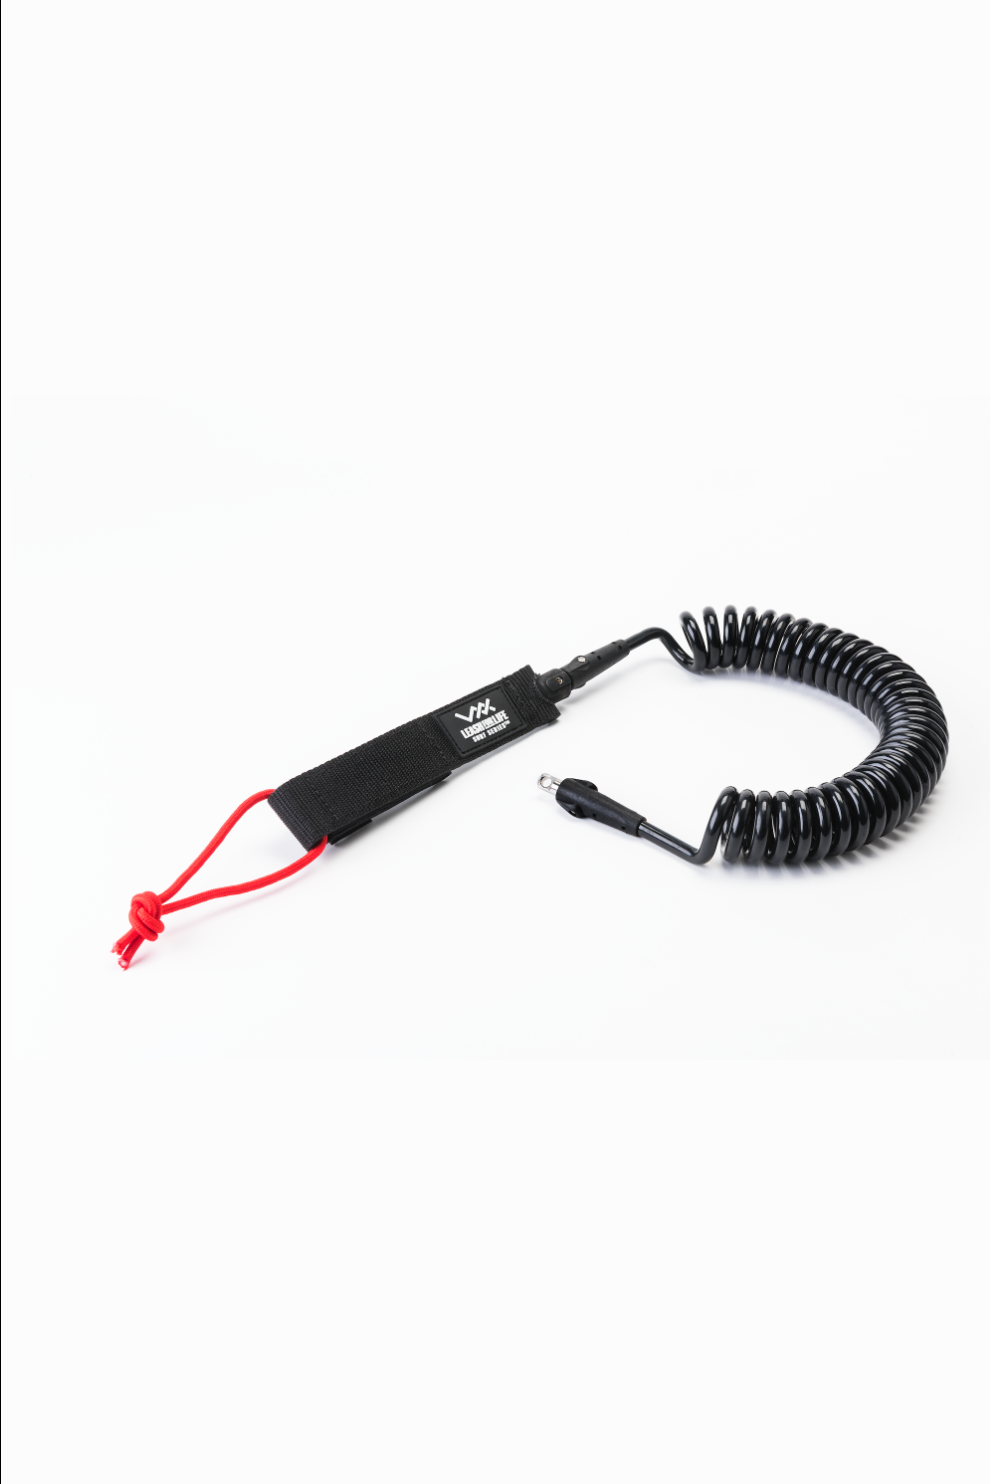 10ft ‘Leash for Life’ Coiled Leash Cord with Rail Saver